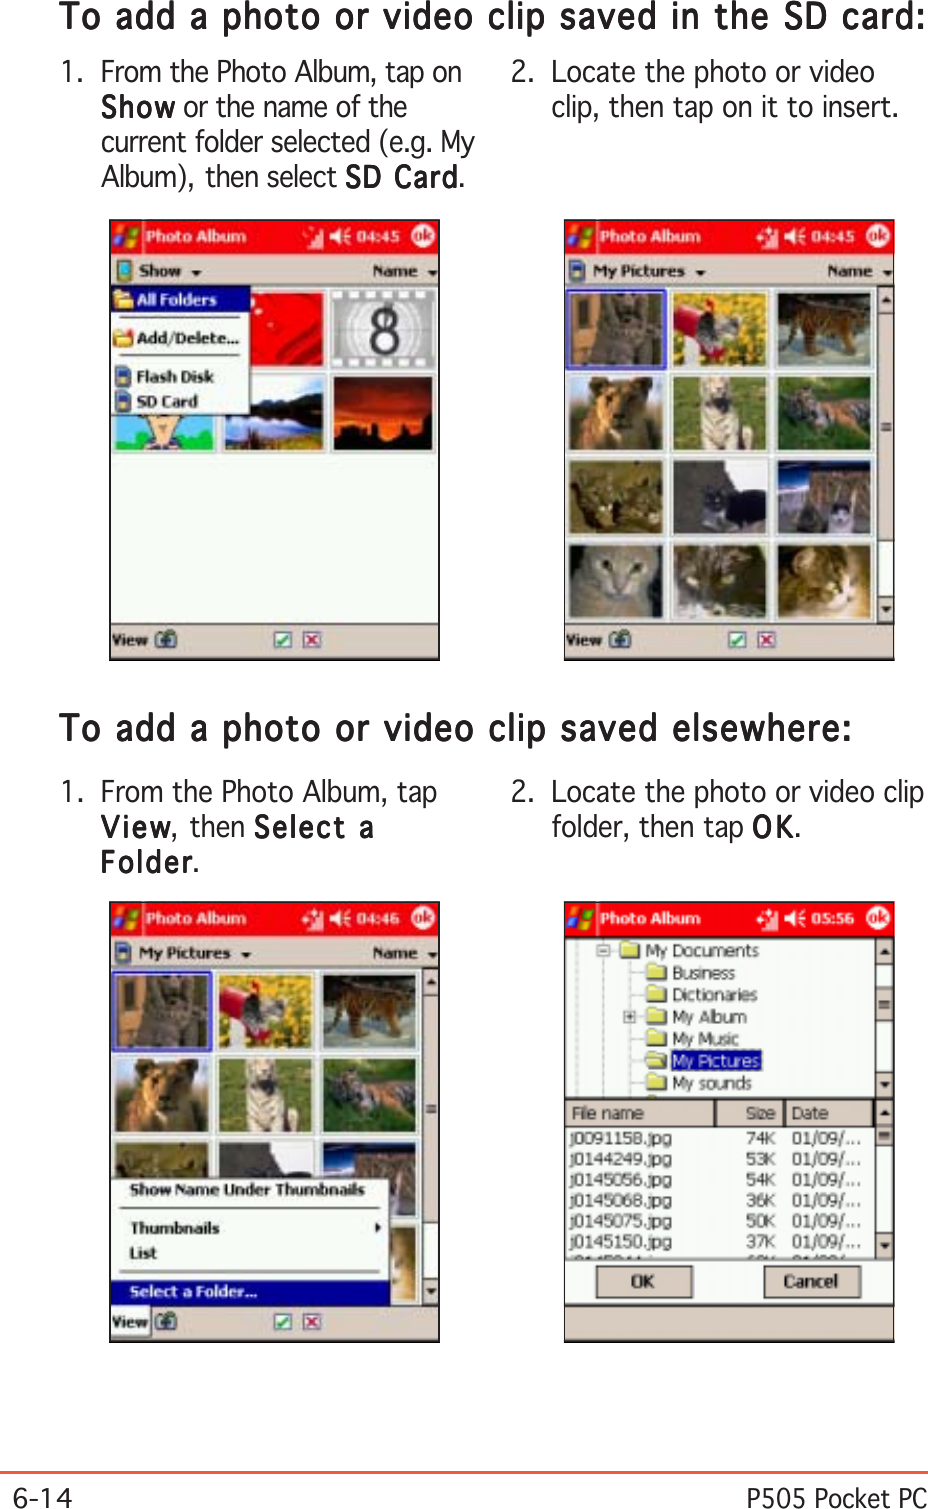 6-14P505 Pocket PC1. From the Photo Album, tap onShowShowShowShowShow or the name of thecurrent folder selected (e.g. MyAlbum), then select SD CardSD CardSD CardSD CardSD Card.To add a photo or video clip saved in the SD card:To add a photo or video clip saved in the SD card:To add a photo or video clip saved in the SD card:To add a photo or video clip saved in the SD card:To add a photo or video clip saved in the SD card:2. Locate the photo or videoclip, then tap on it to insert.1. From the Photo Album, tapViewViewViewViewView, then Select aSelect aSelect aSelect aSelect aFolderFolderFolderFolderFolder.To add a photo or video clip saved elsewhere:To add a photo or video clip saved elsewhere:To add a photo or video clip saved elsewhere:To add a photo or video clip saved elsewhere:To add a photo or video clip saved elsewhere:2. Locate the photo or video clipfolder, then tap OKOKOKOKOK.